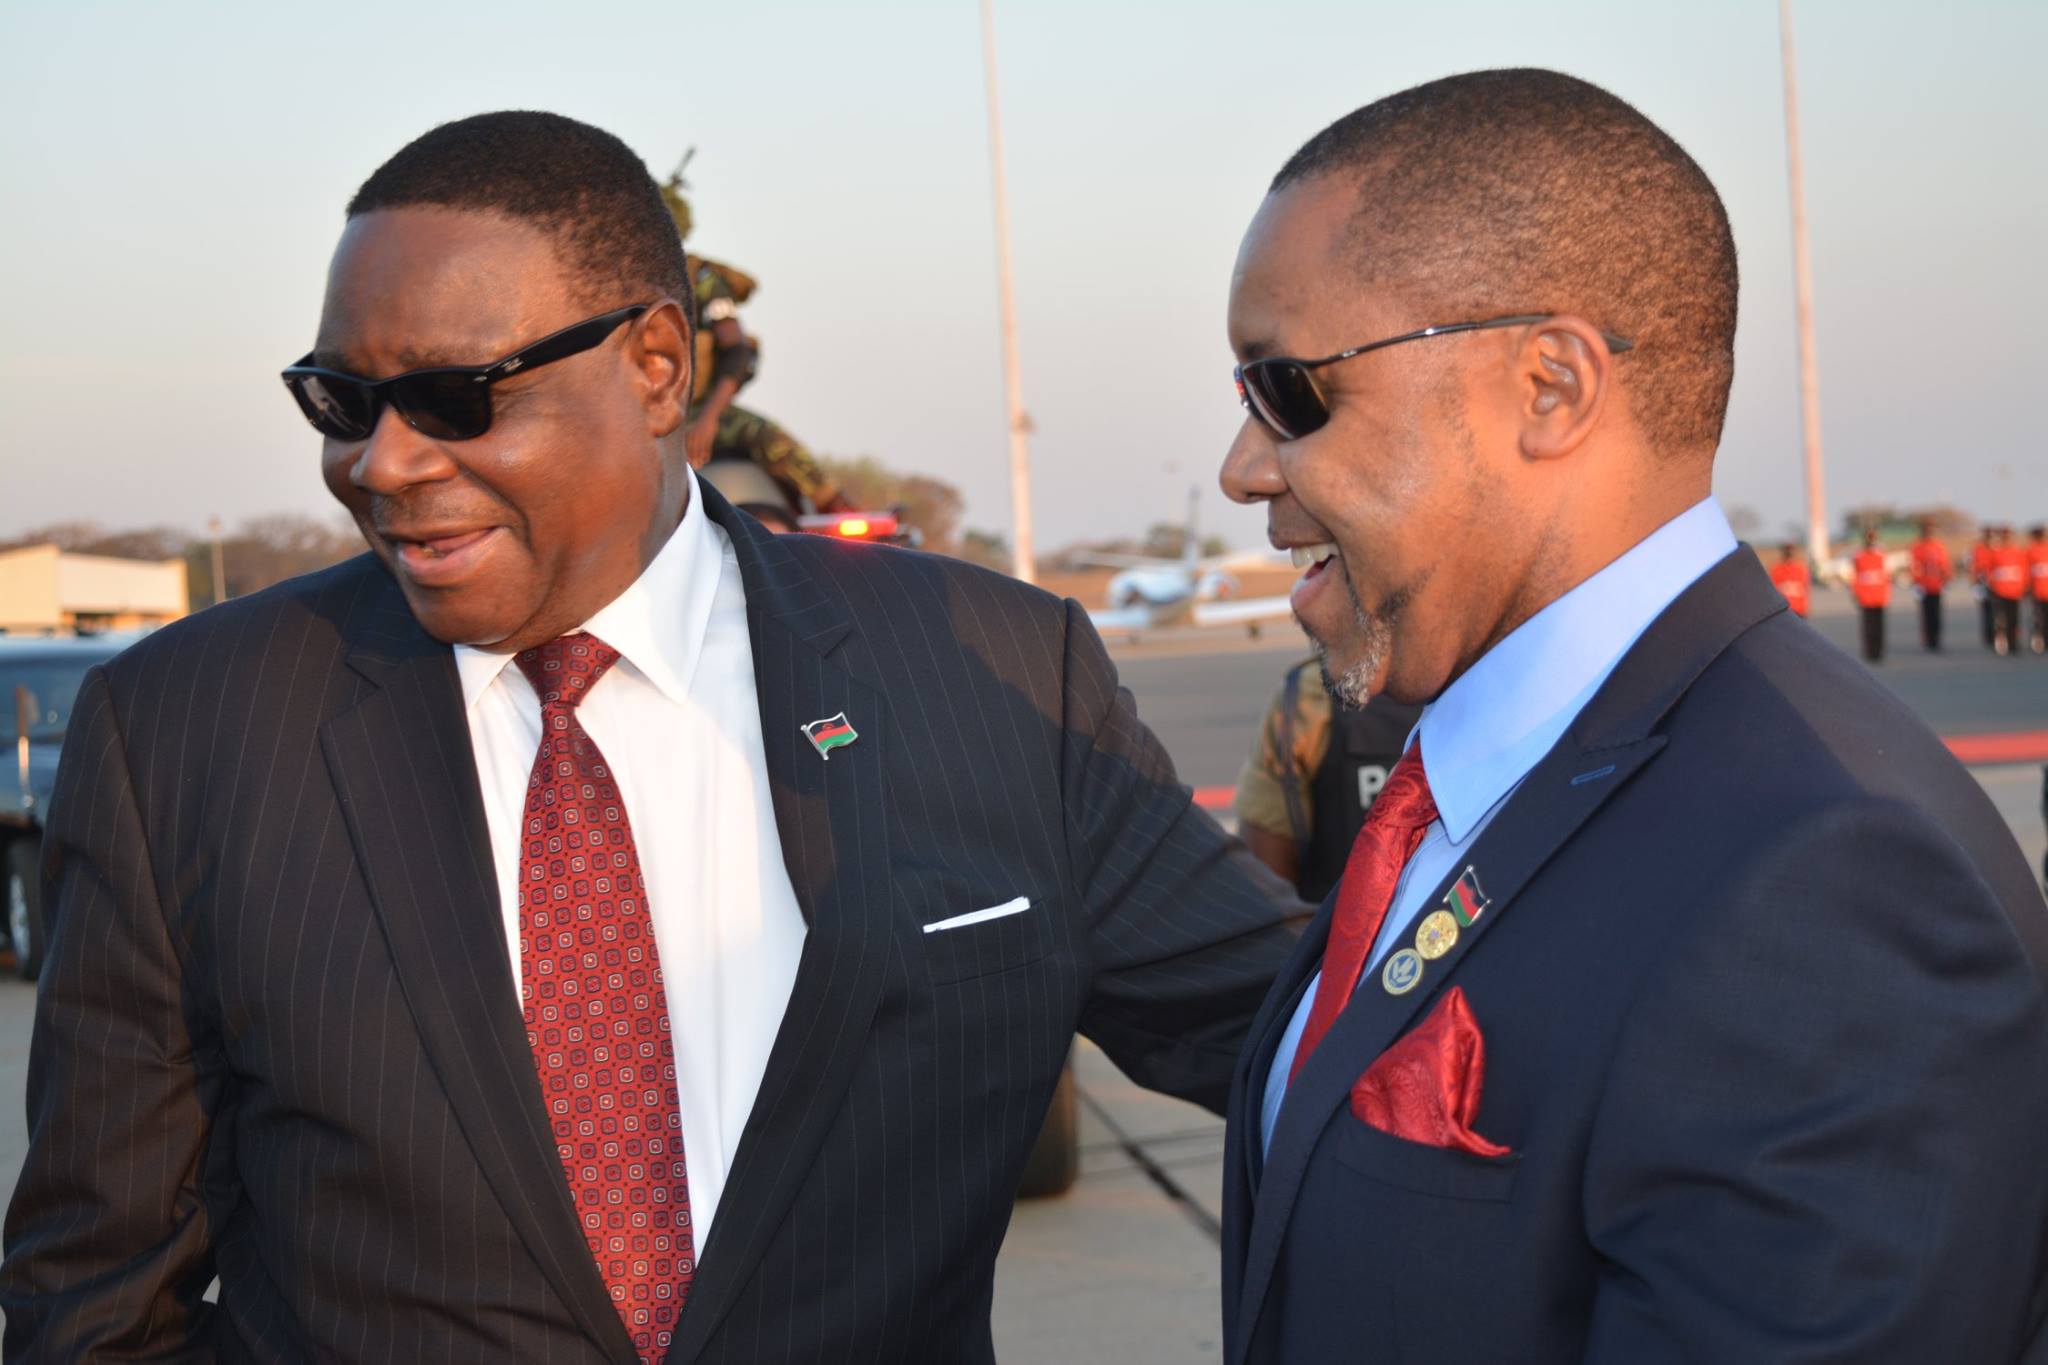 Expectations are high among Malawians as Mutharika delivers his last State of the Nation Address tomorrow